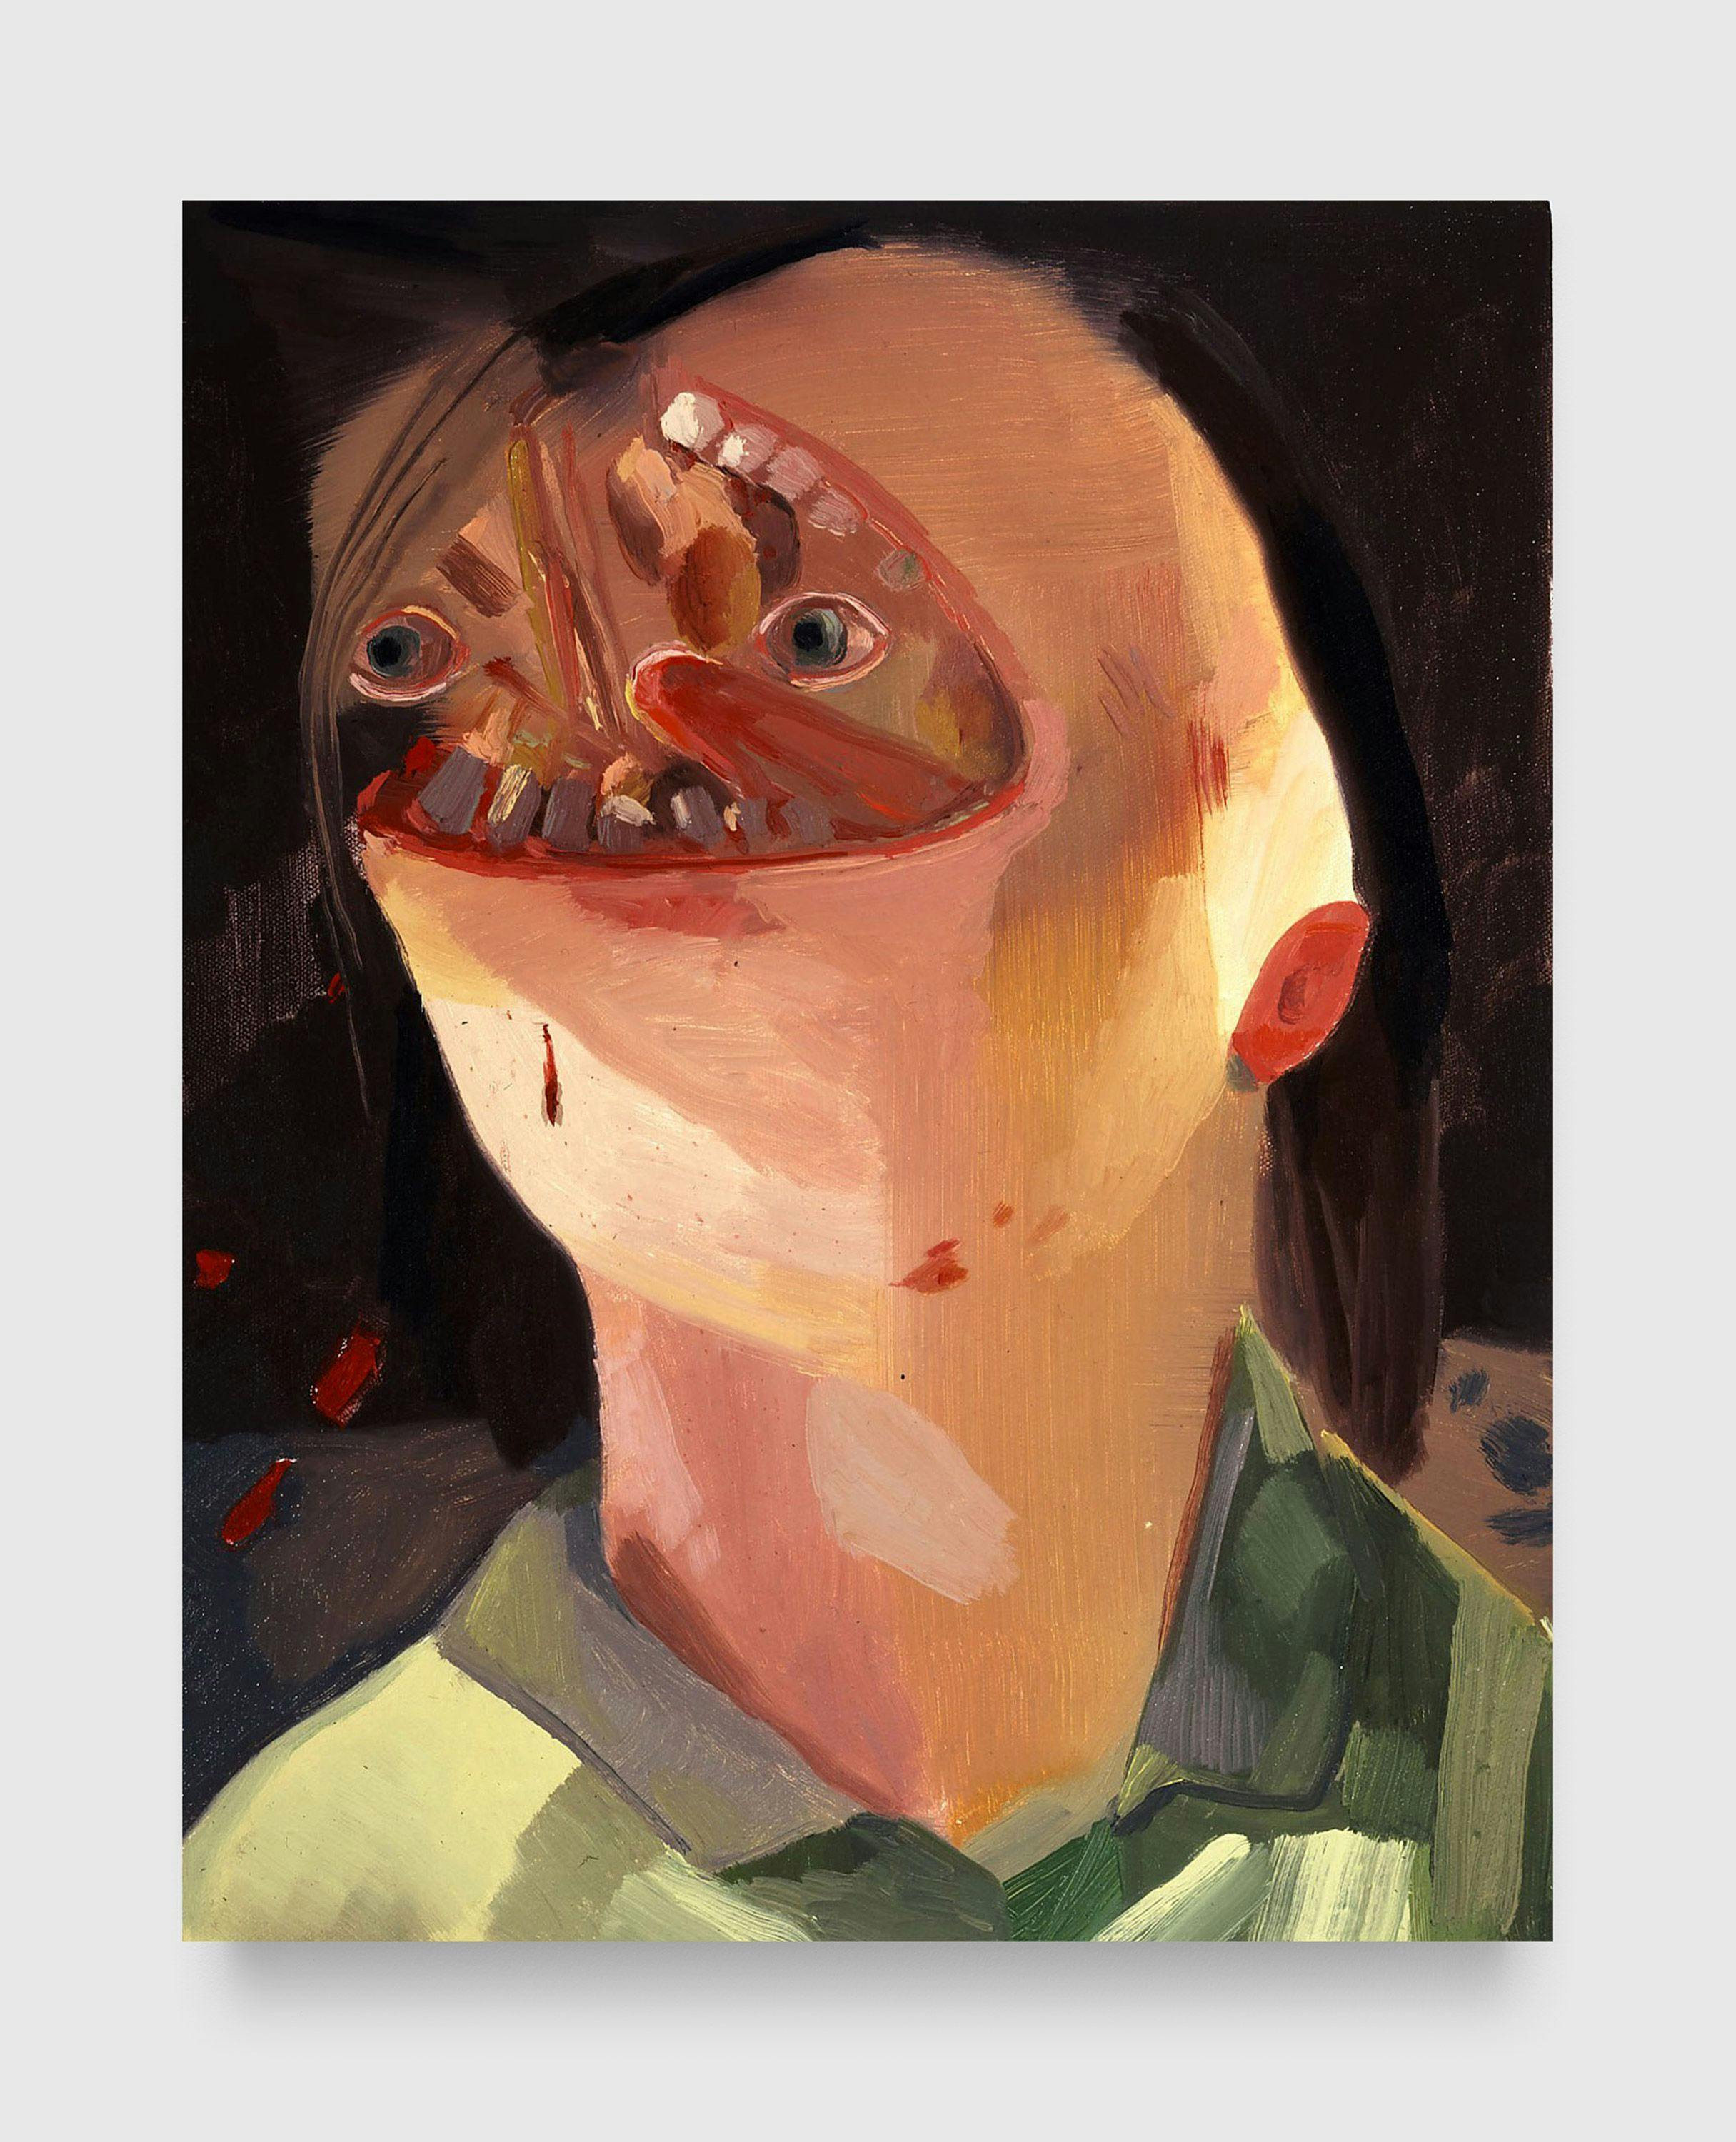 A painting by Dana Schutz, titled Face Eater, dated 2004.